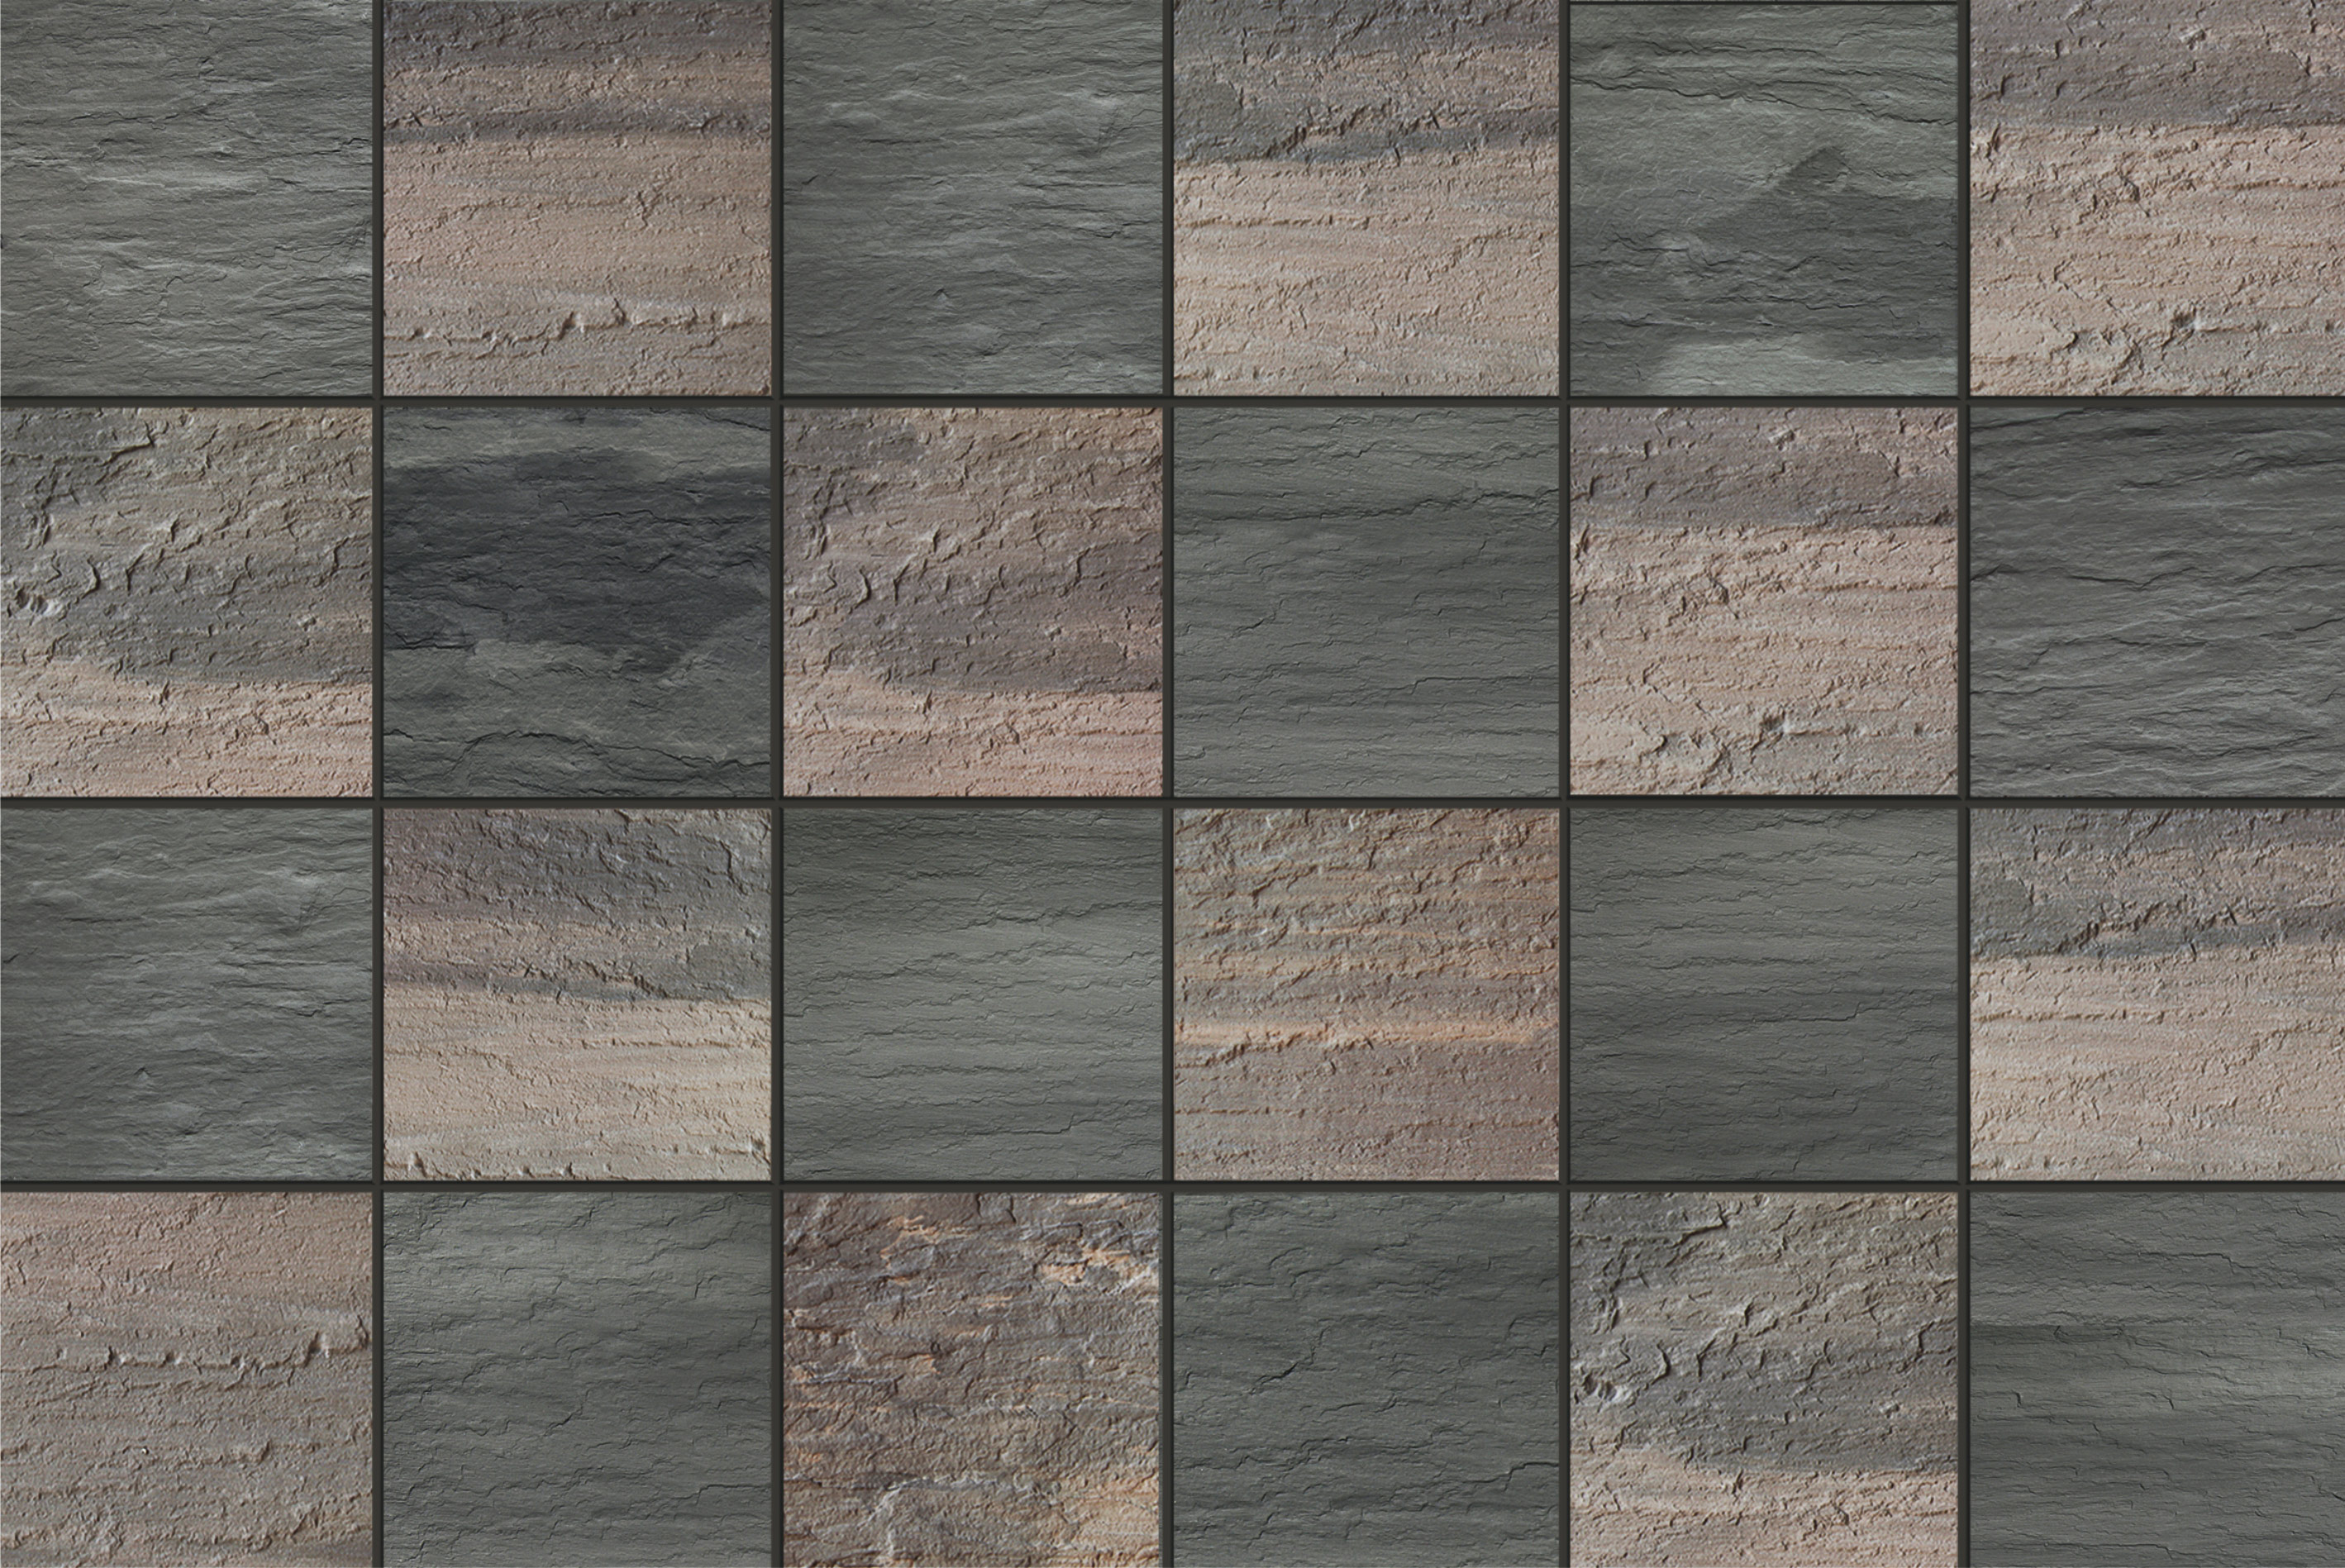 Oasis-Stone-combination-of-Raine-_-Winde-600x600mm-with-seam-of-10mm-of-043-grout-color